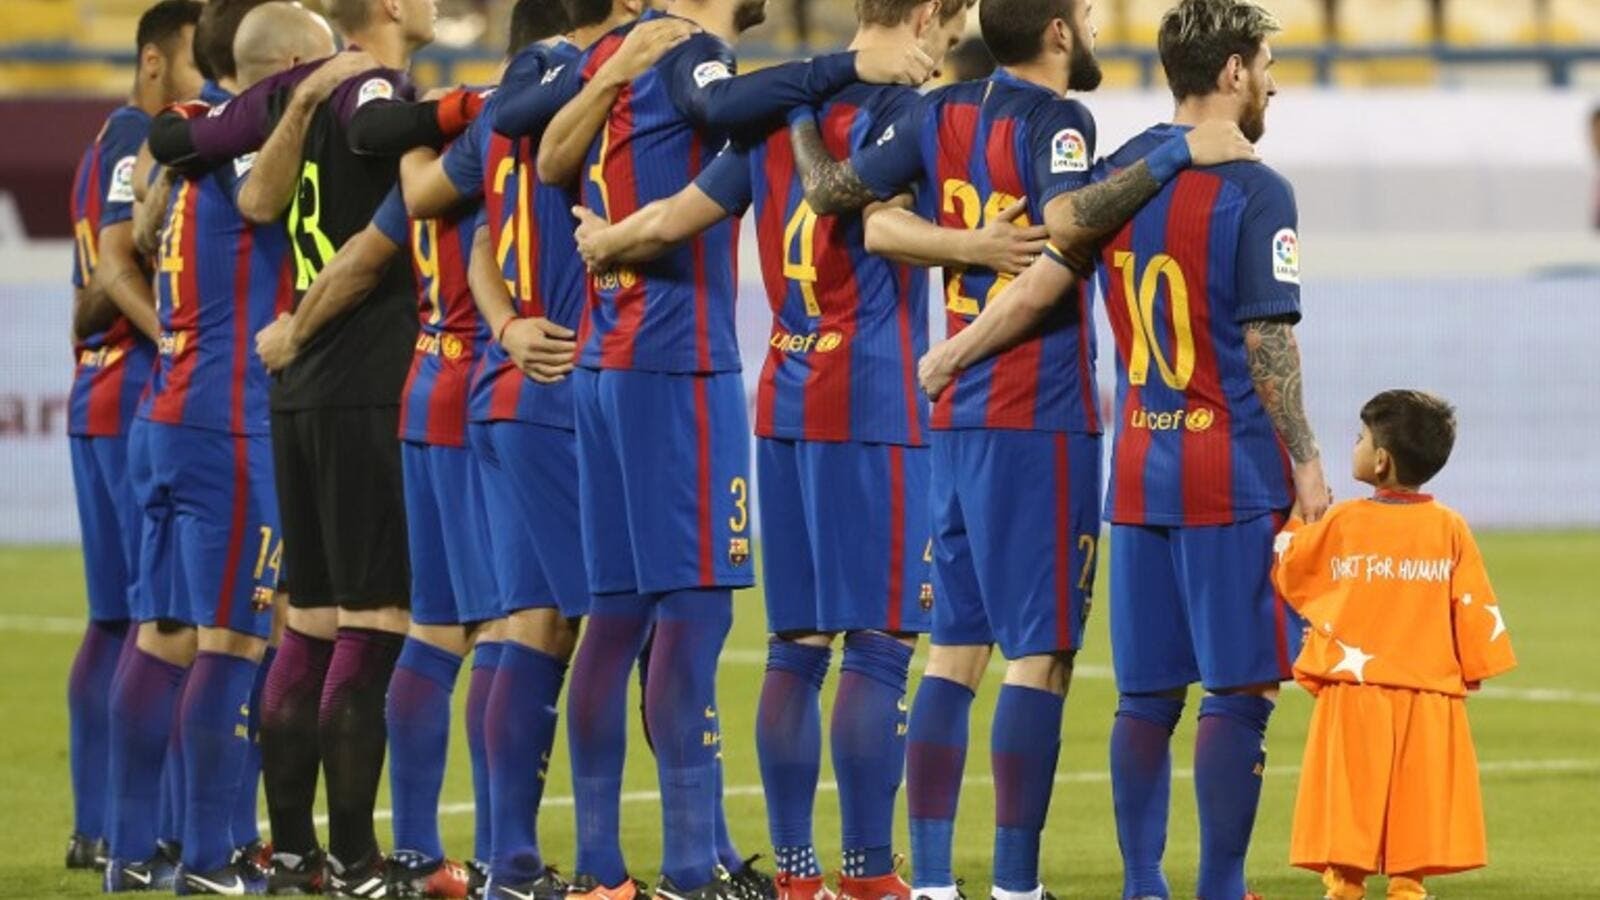 The LaLiga teams to pay their respects with a minute’s silence before every match that remains